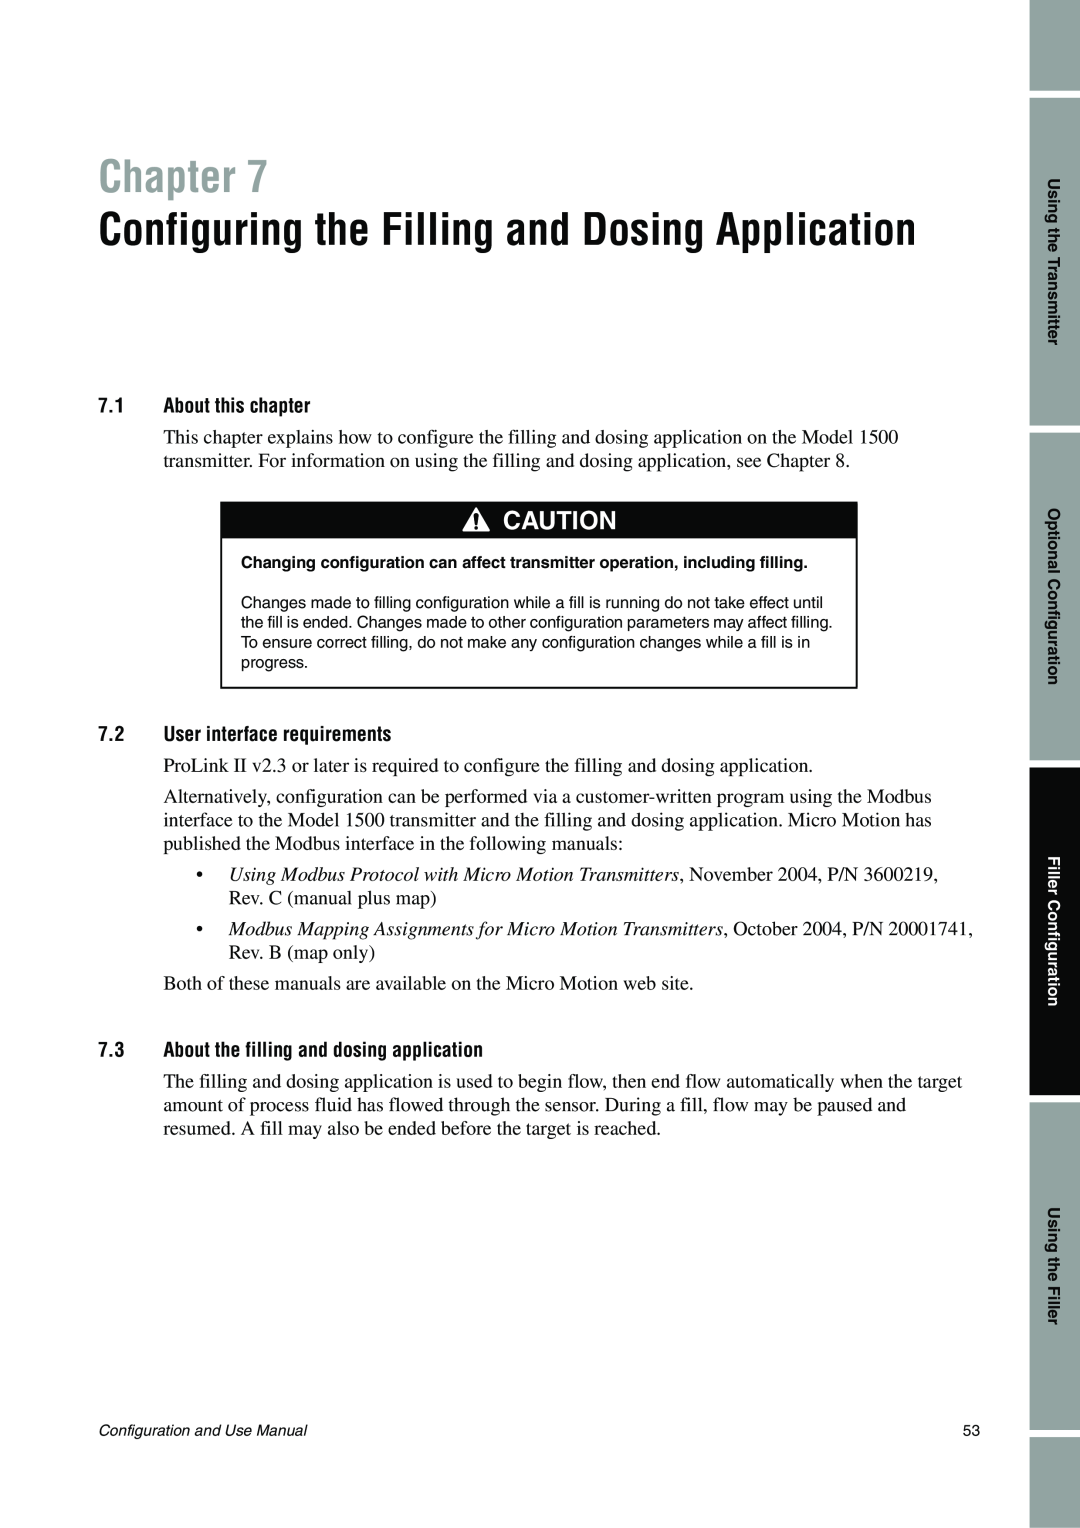 Emerson Process Management 1500 manual Chapter, Configuring the Filling and Dosing Application, 7.1About this chapter 